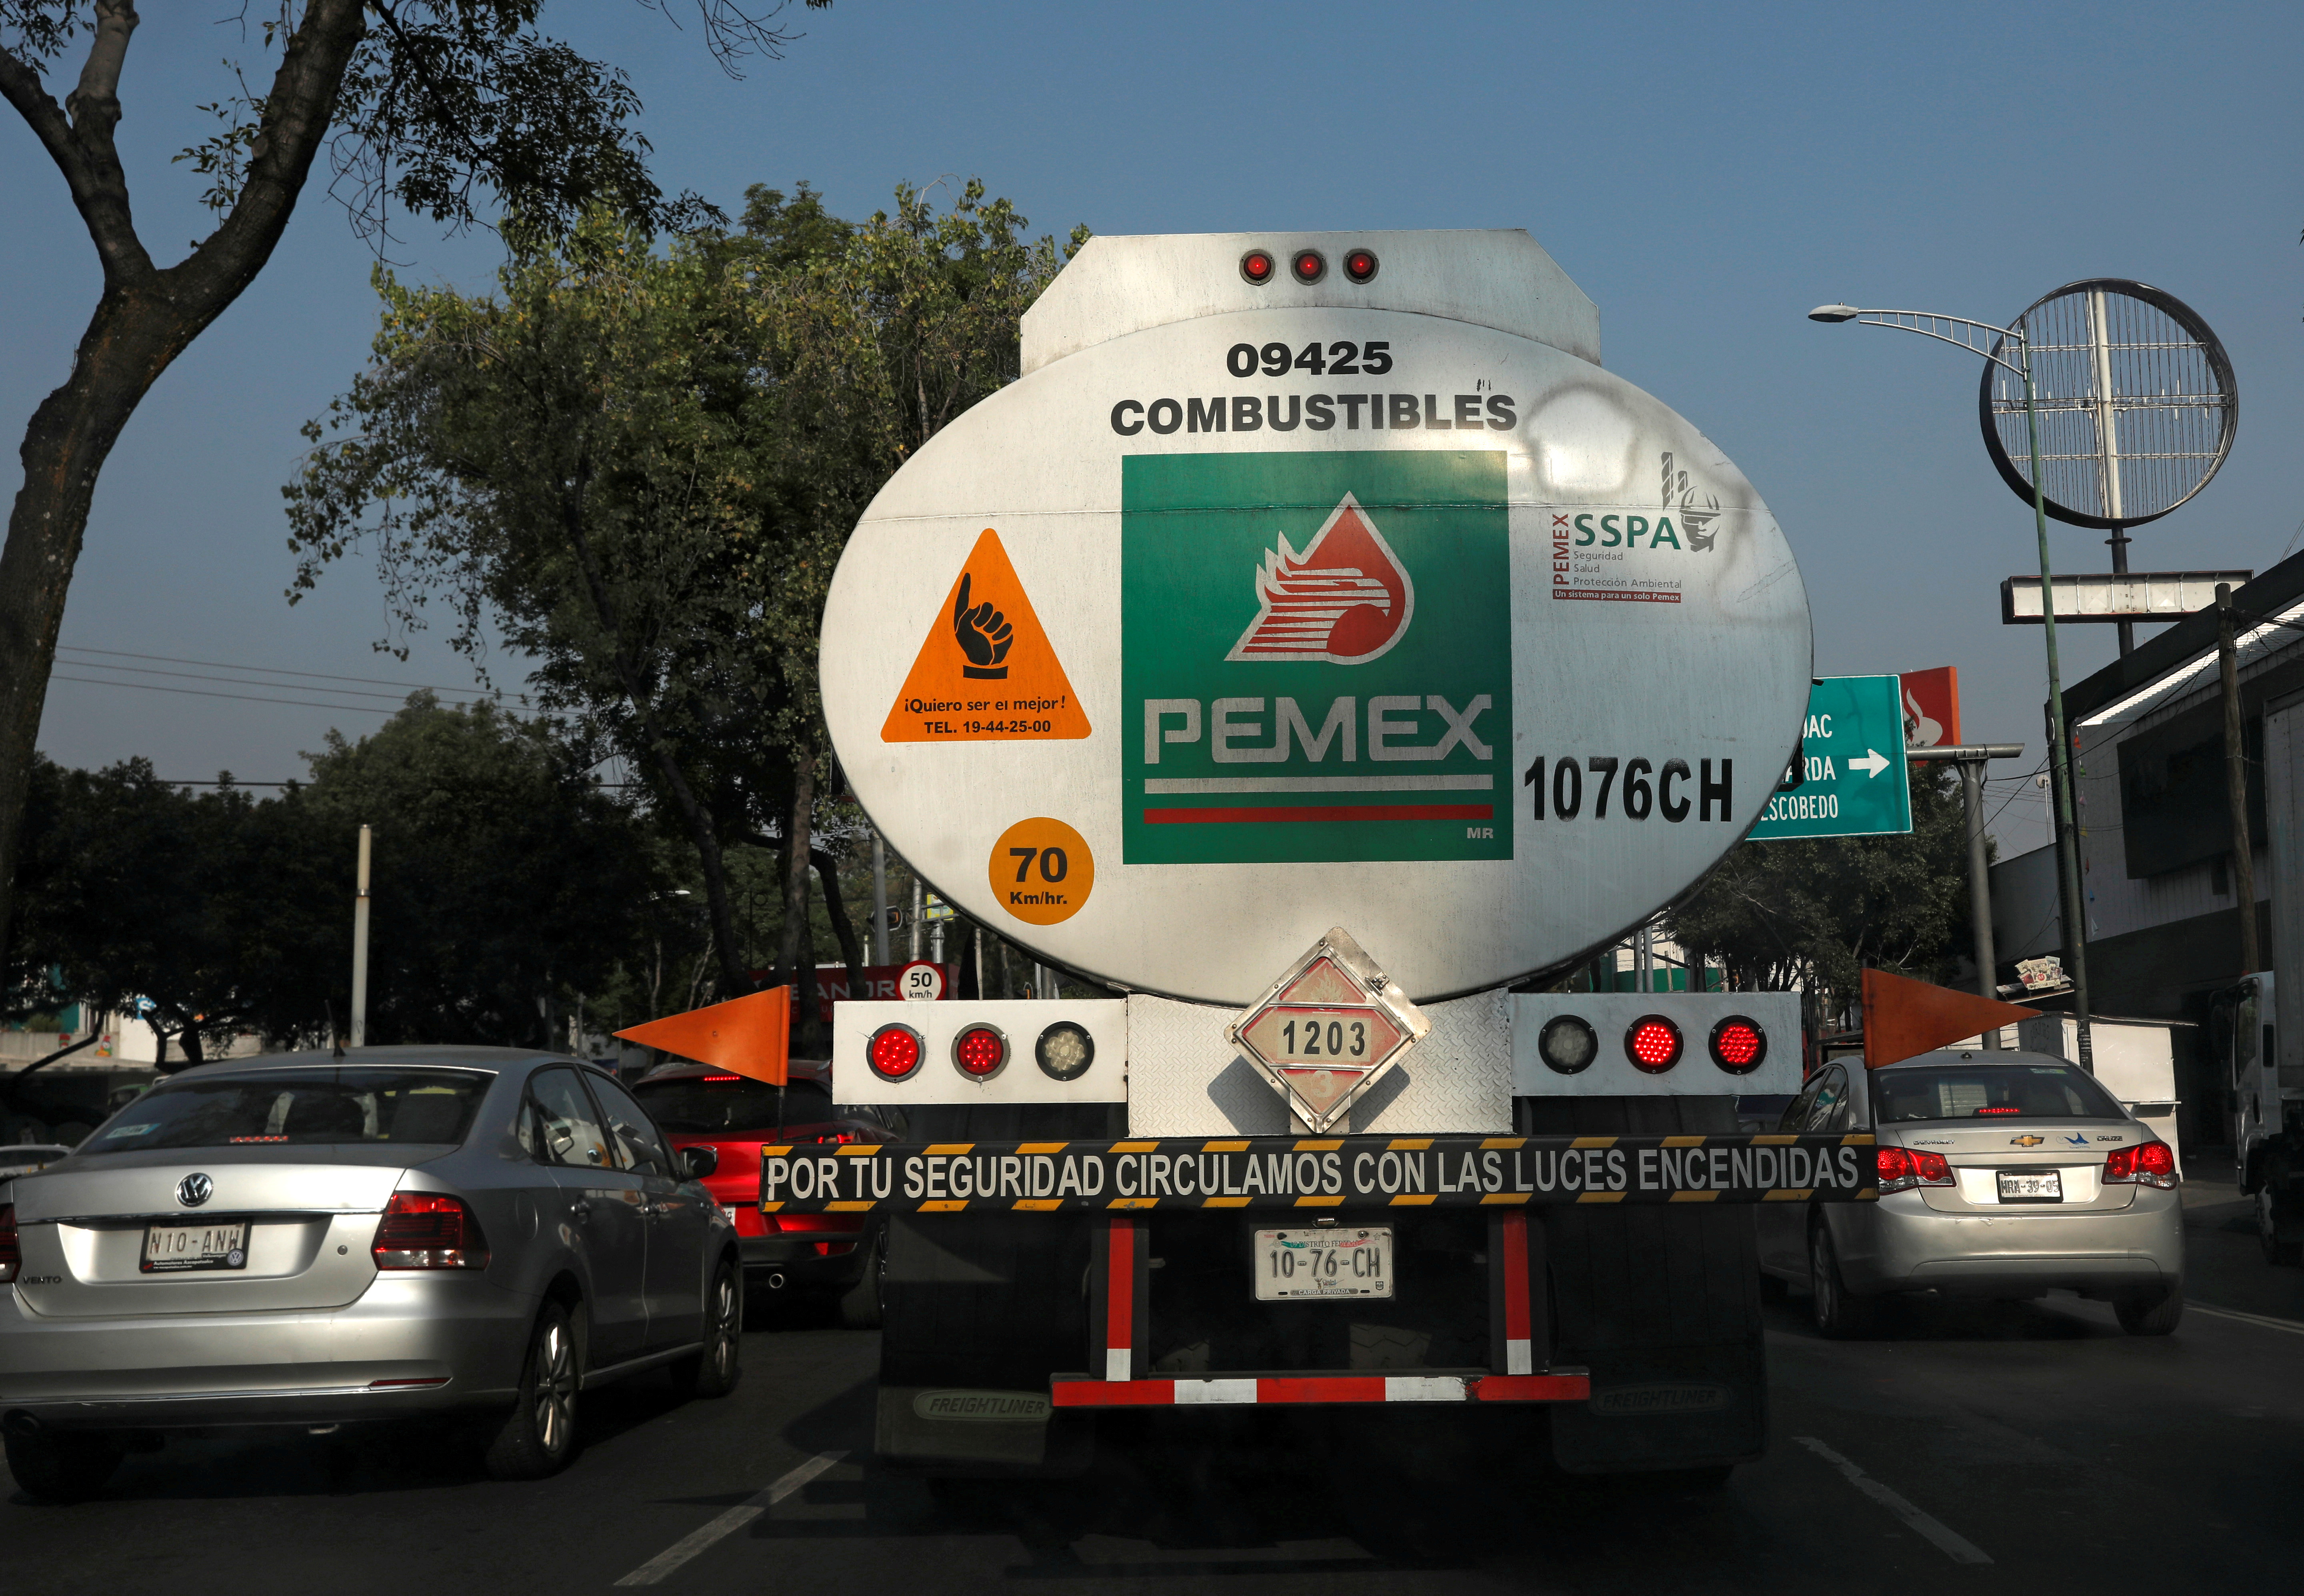 A tanker truck transporting fuel is pictured along the streets en route to a gas station, in Mexico City